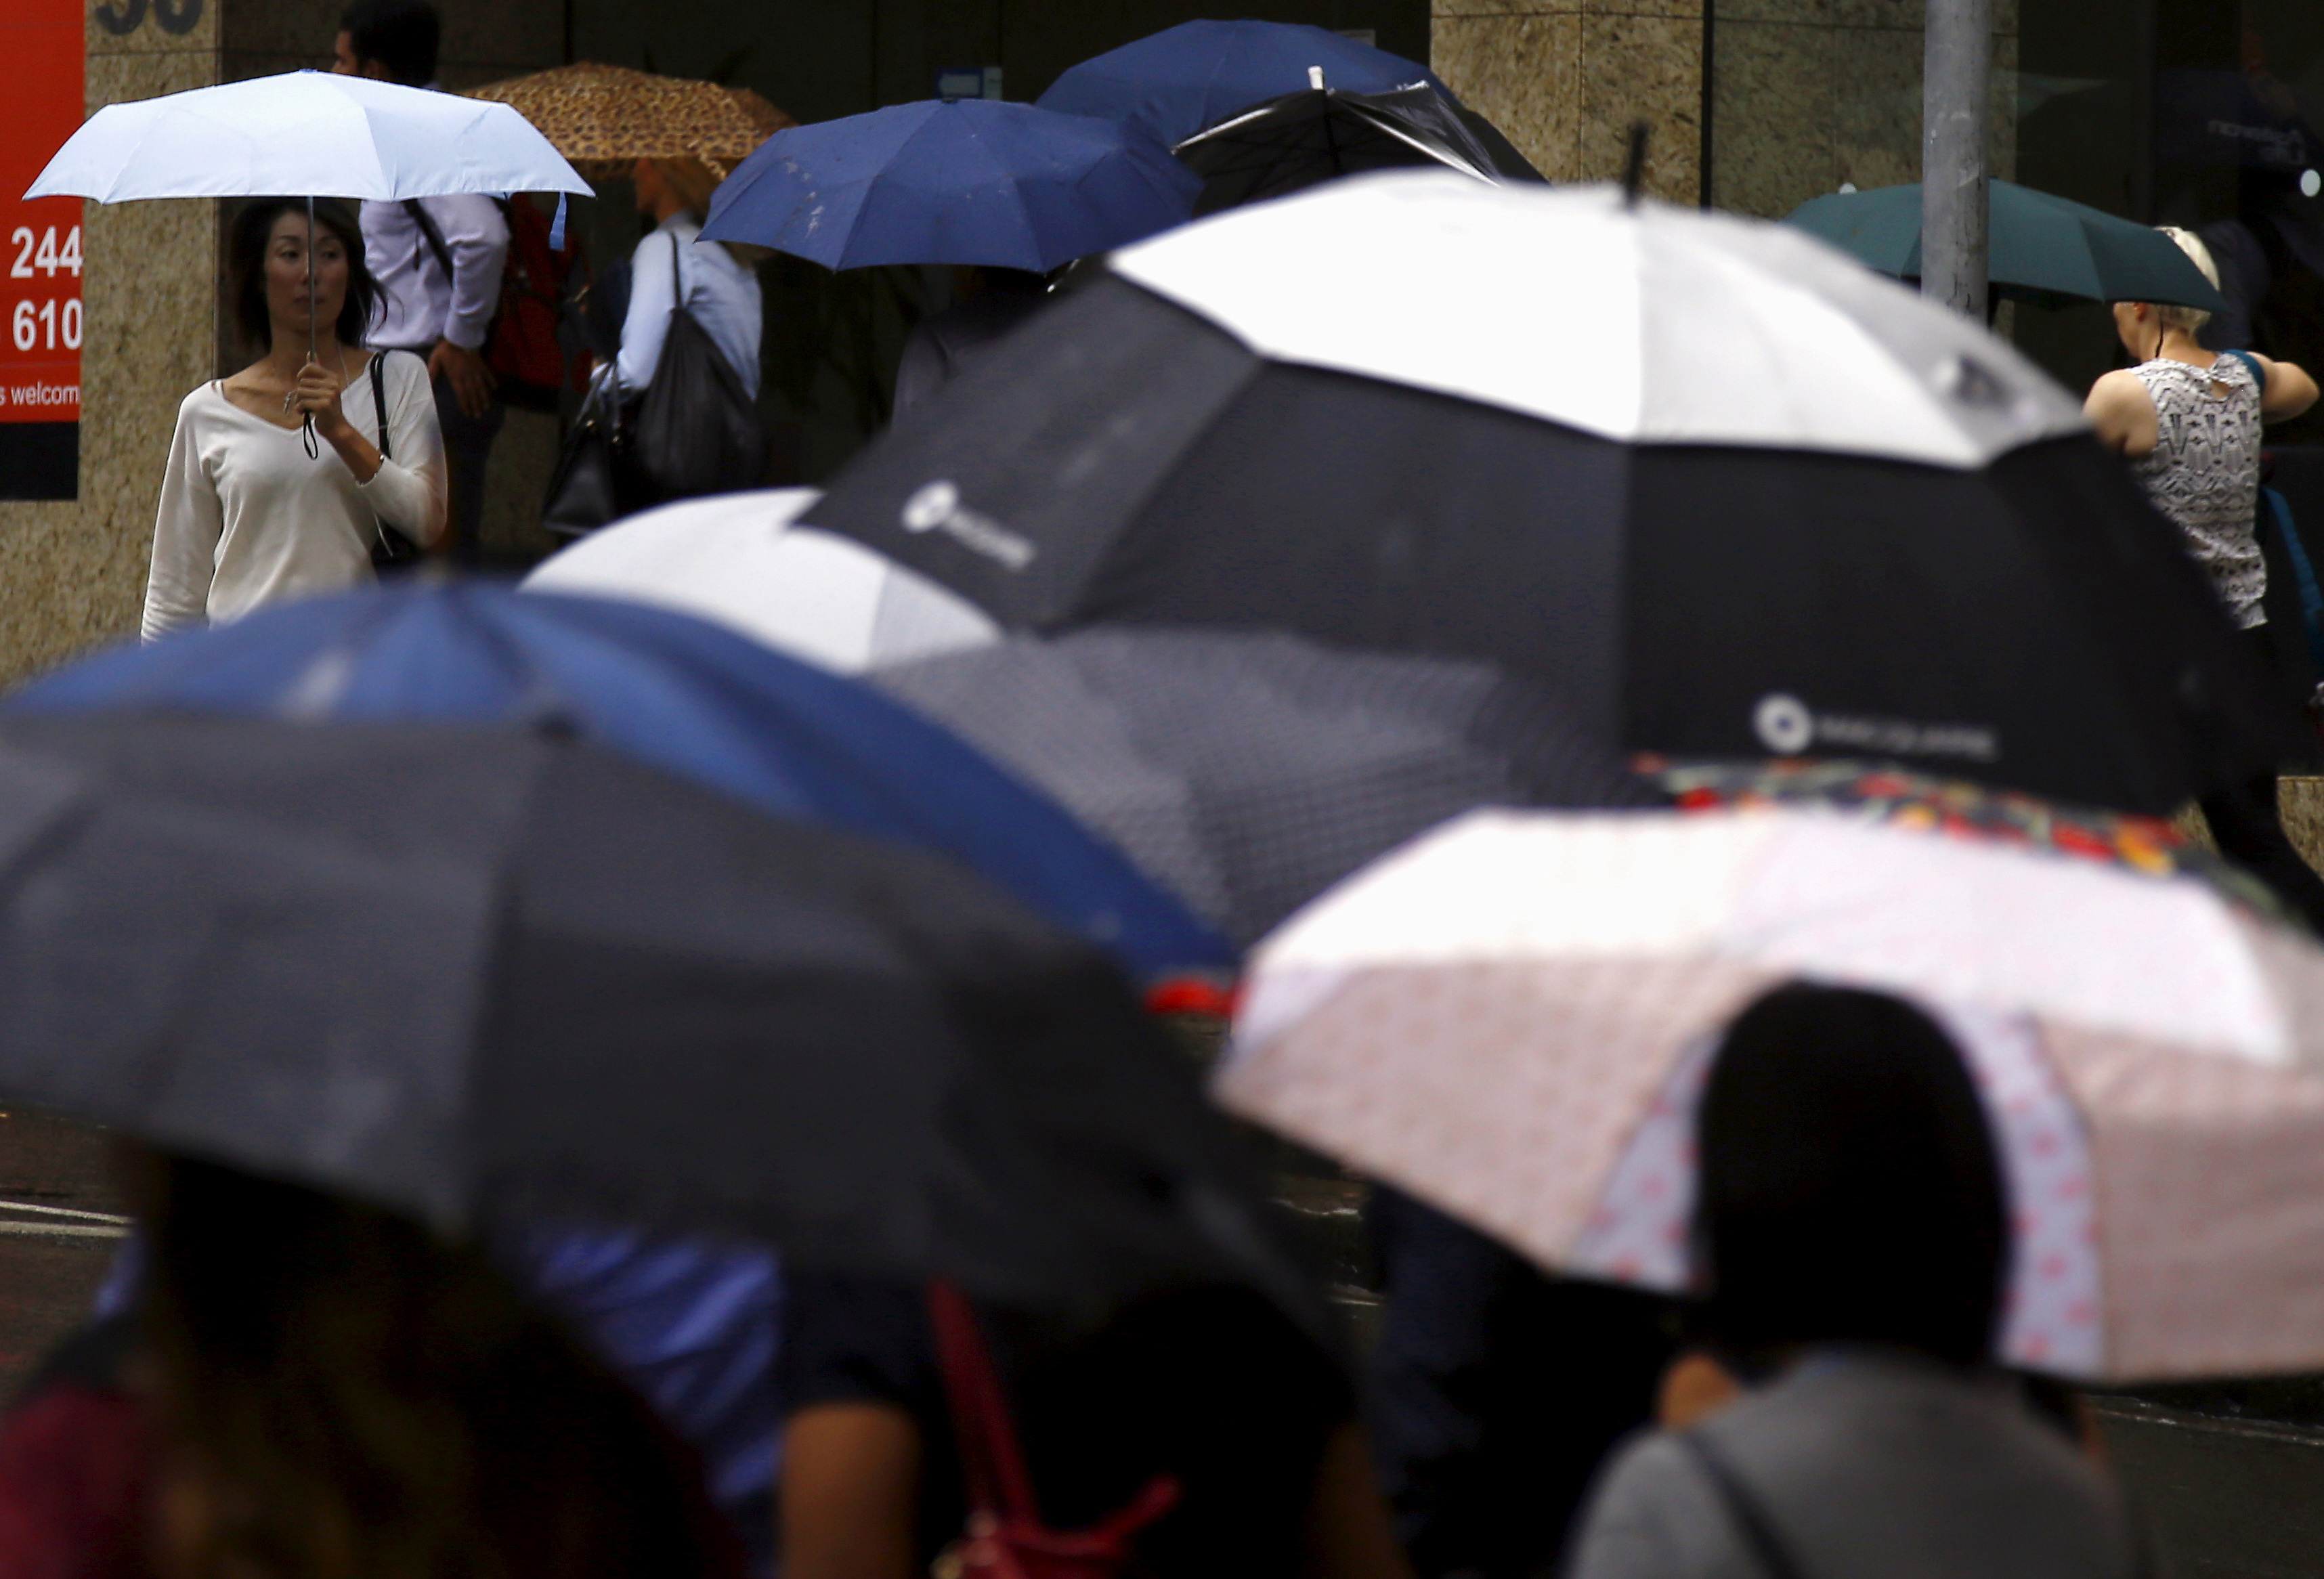 Pedestrians hold umbrellas as they walk to office buildings on a rainy morning in central Sydney, Australia